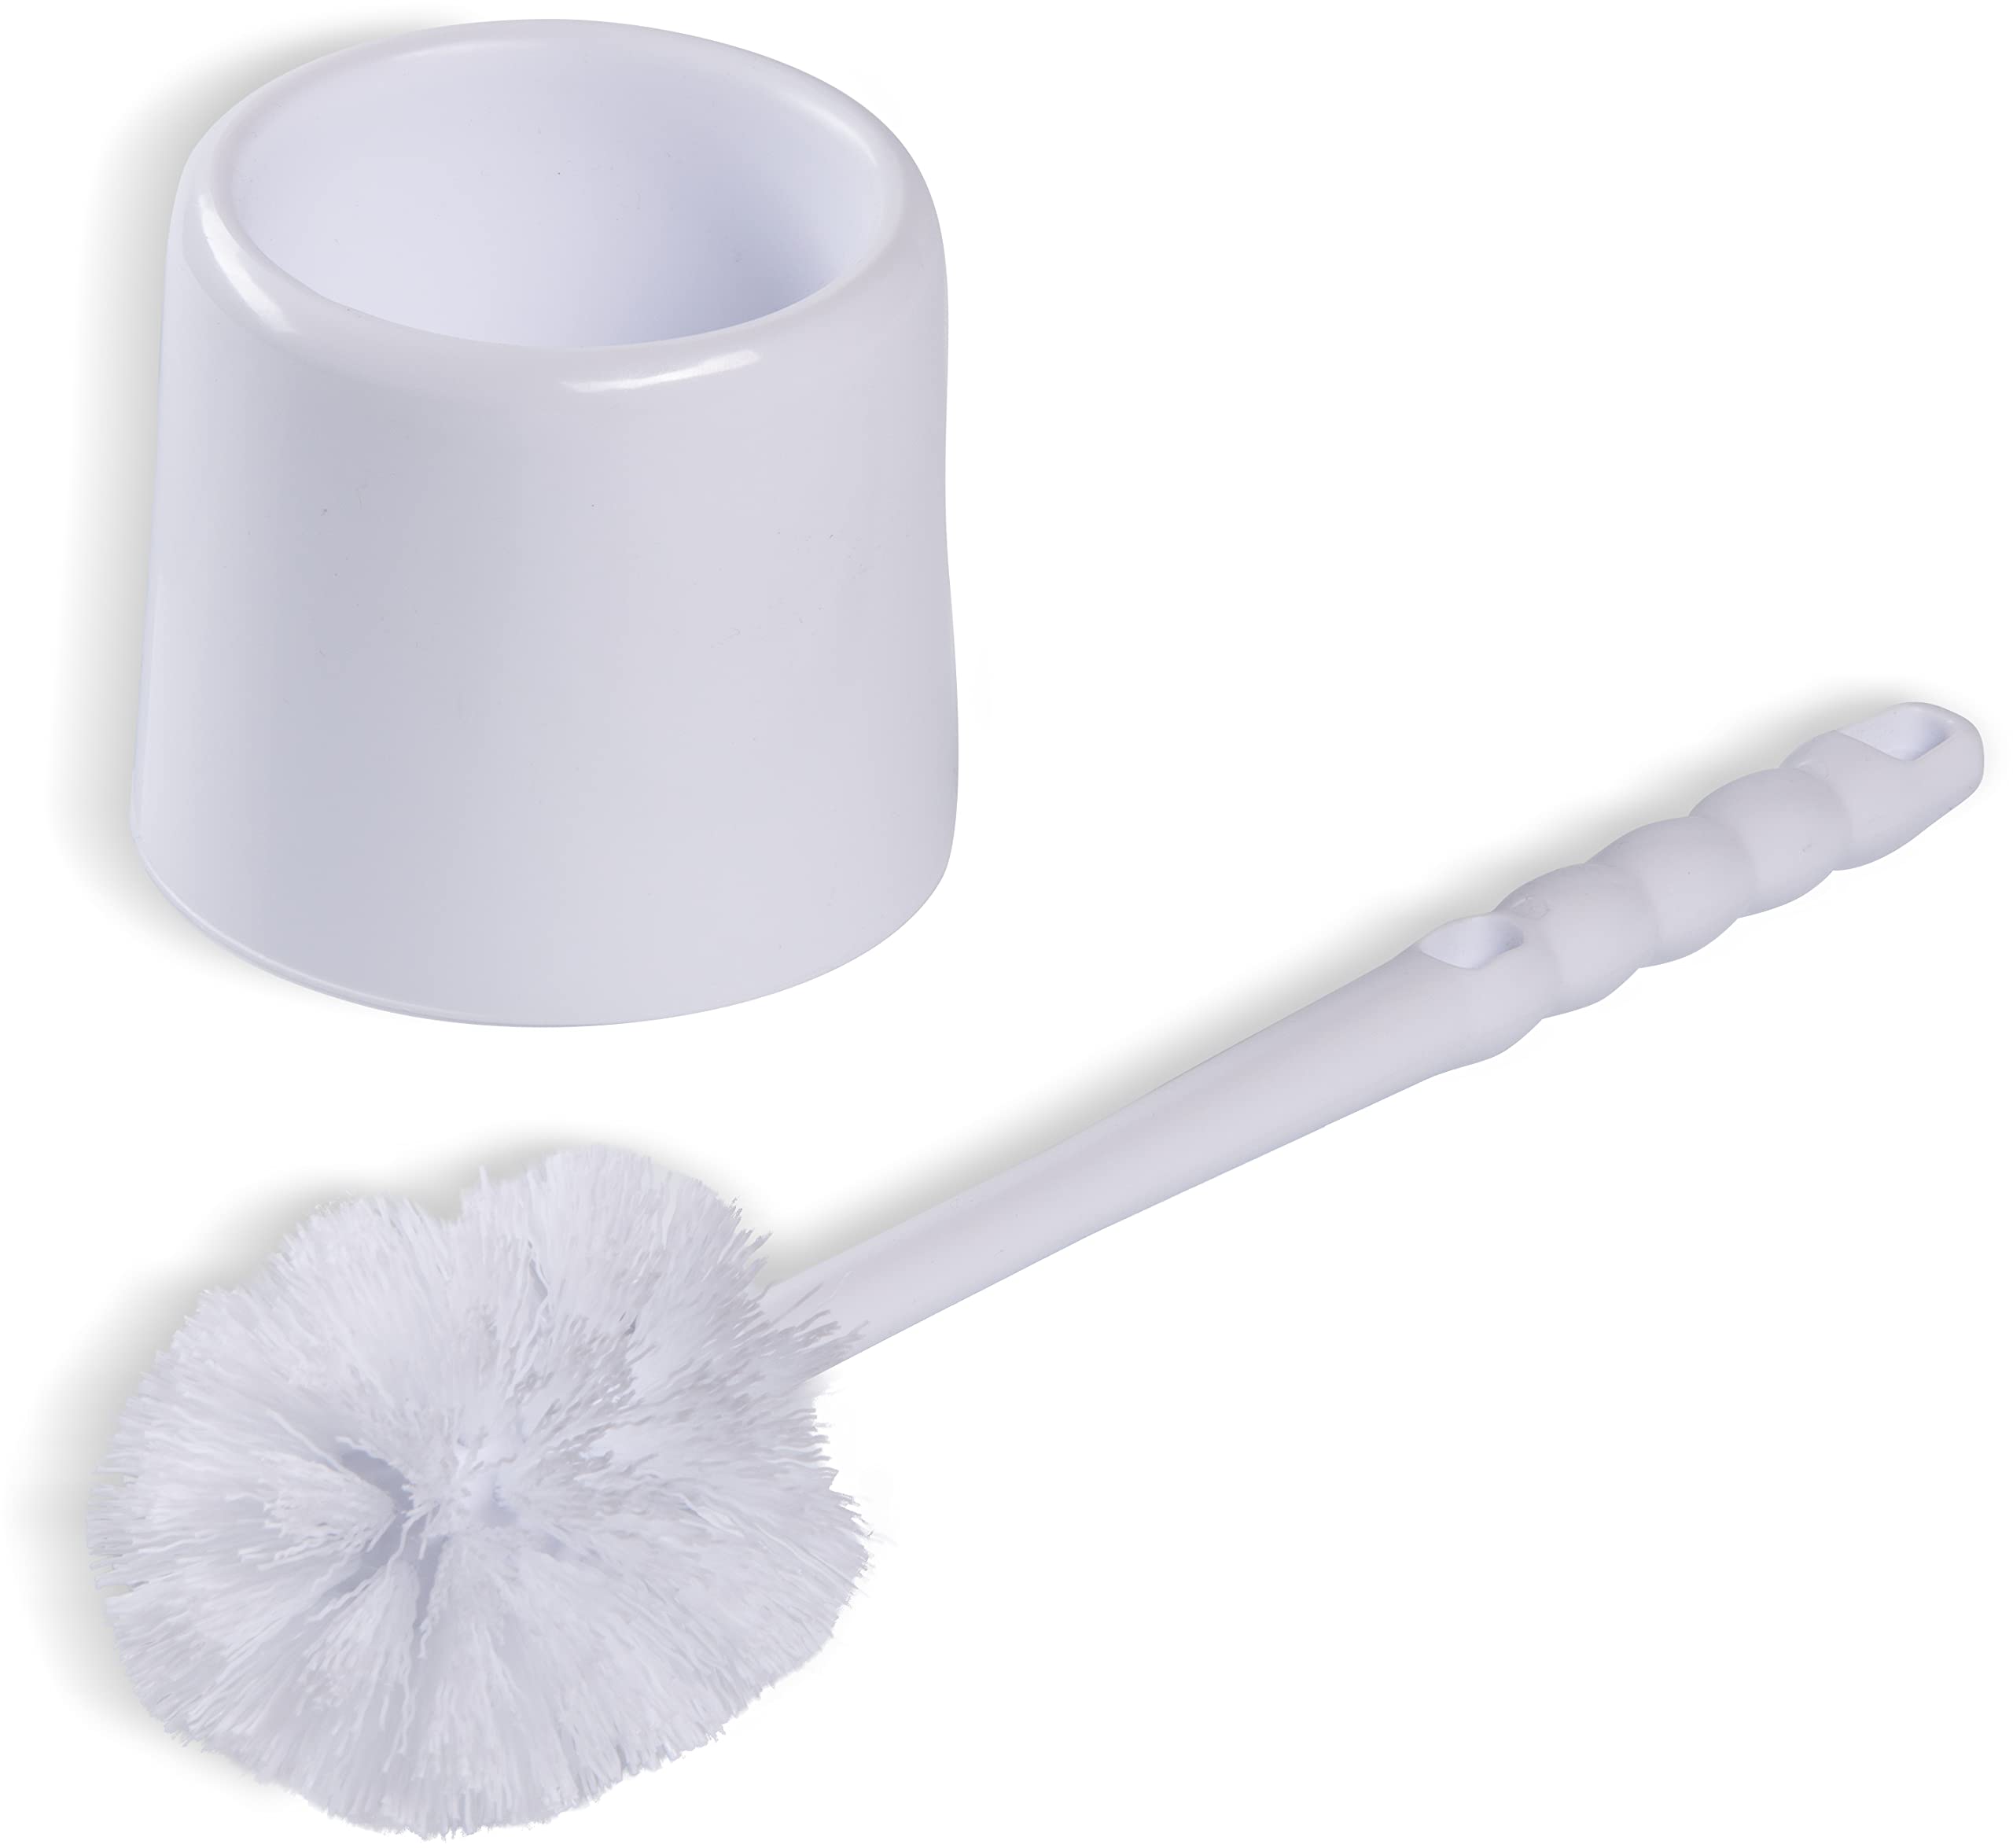 Carlisle FoodService Products 36719700 Toilet Bowl Brush with Hideaway Holder, 16